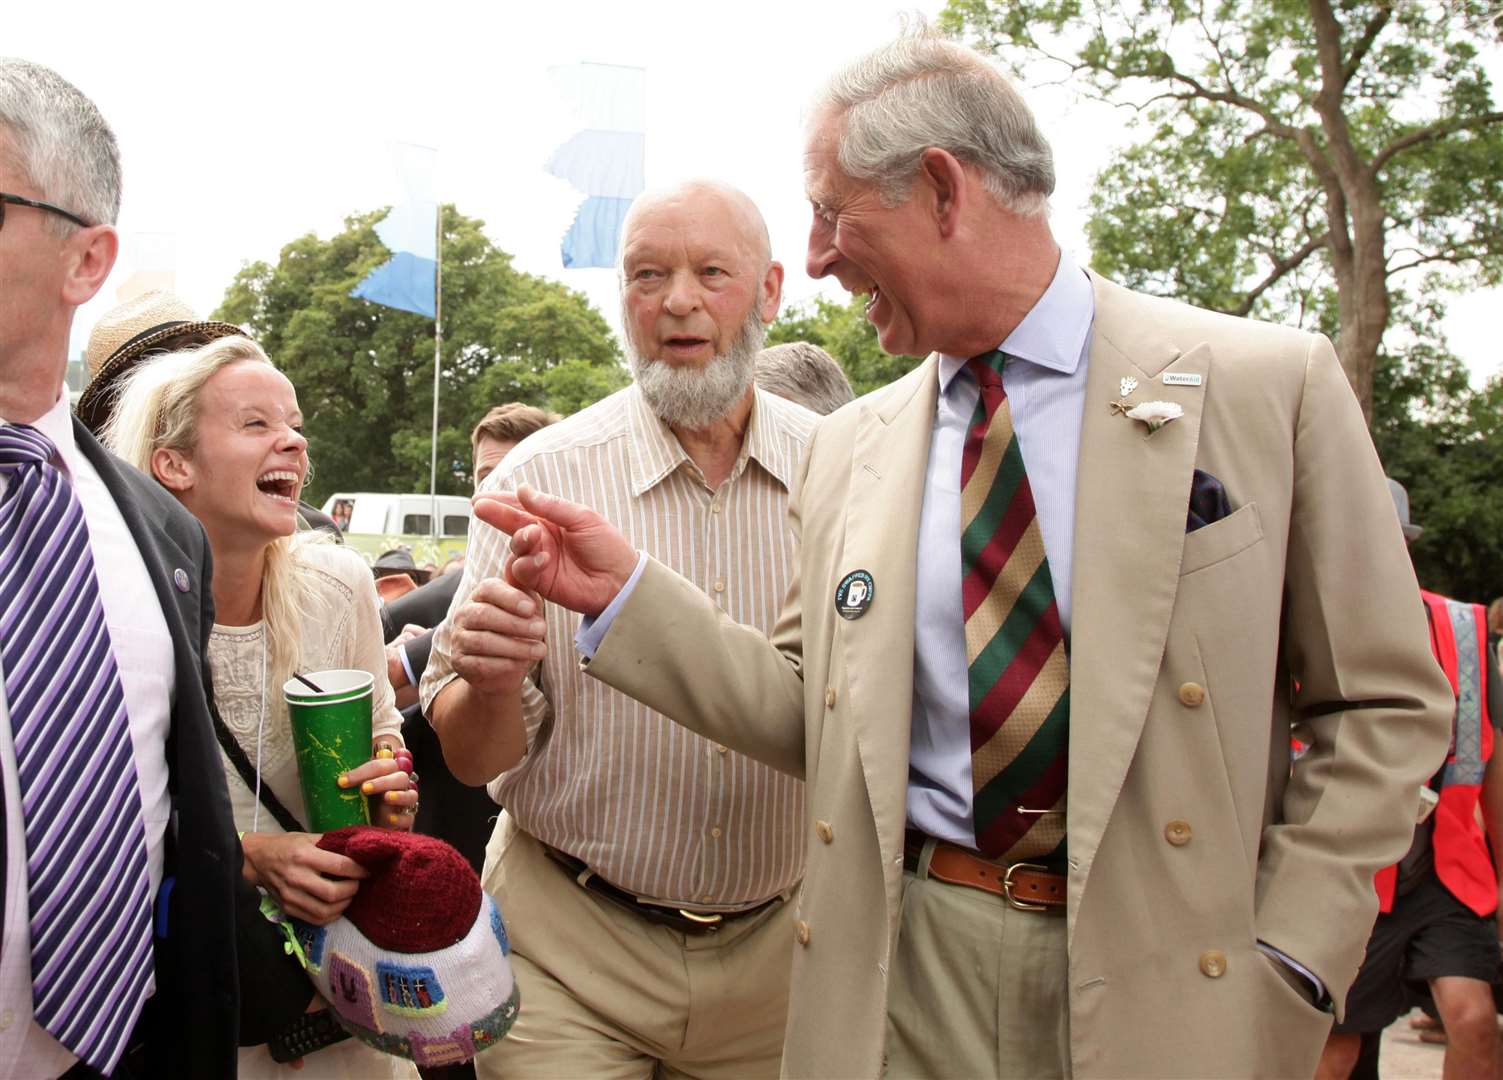 The then-Prince of Wales with Michael Eavis (centre) as Charles visited Glastonbury Festival 2010 to mark the 40th anniversary of the event (Yui Mok/PA)